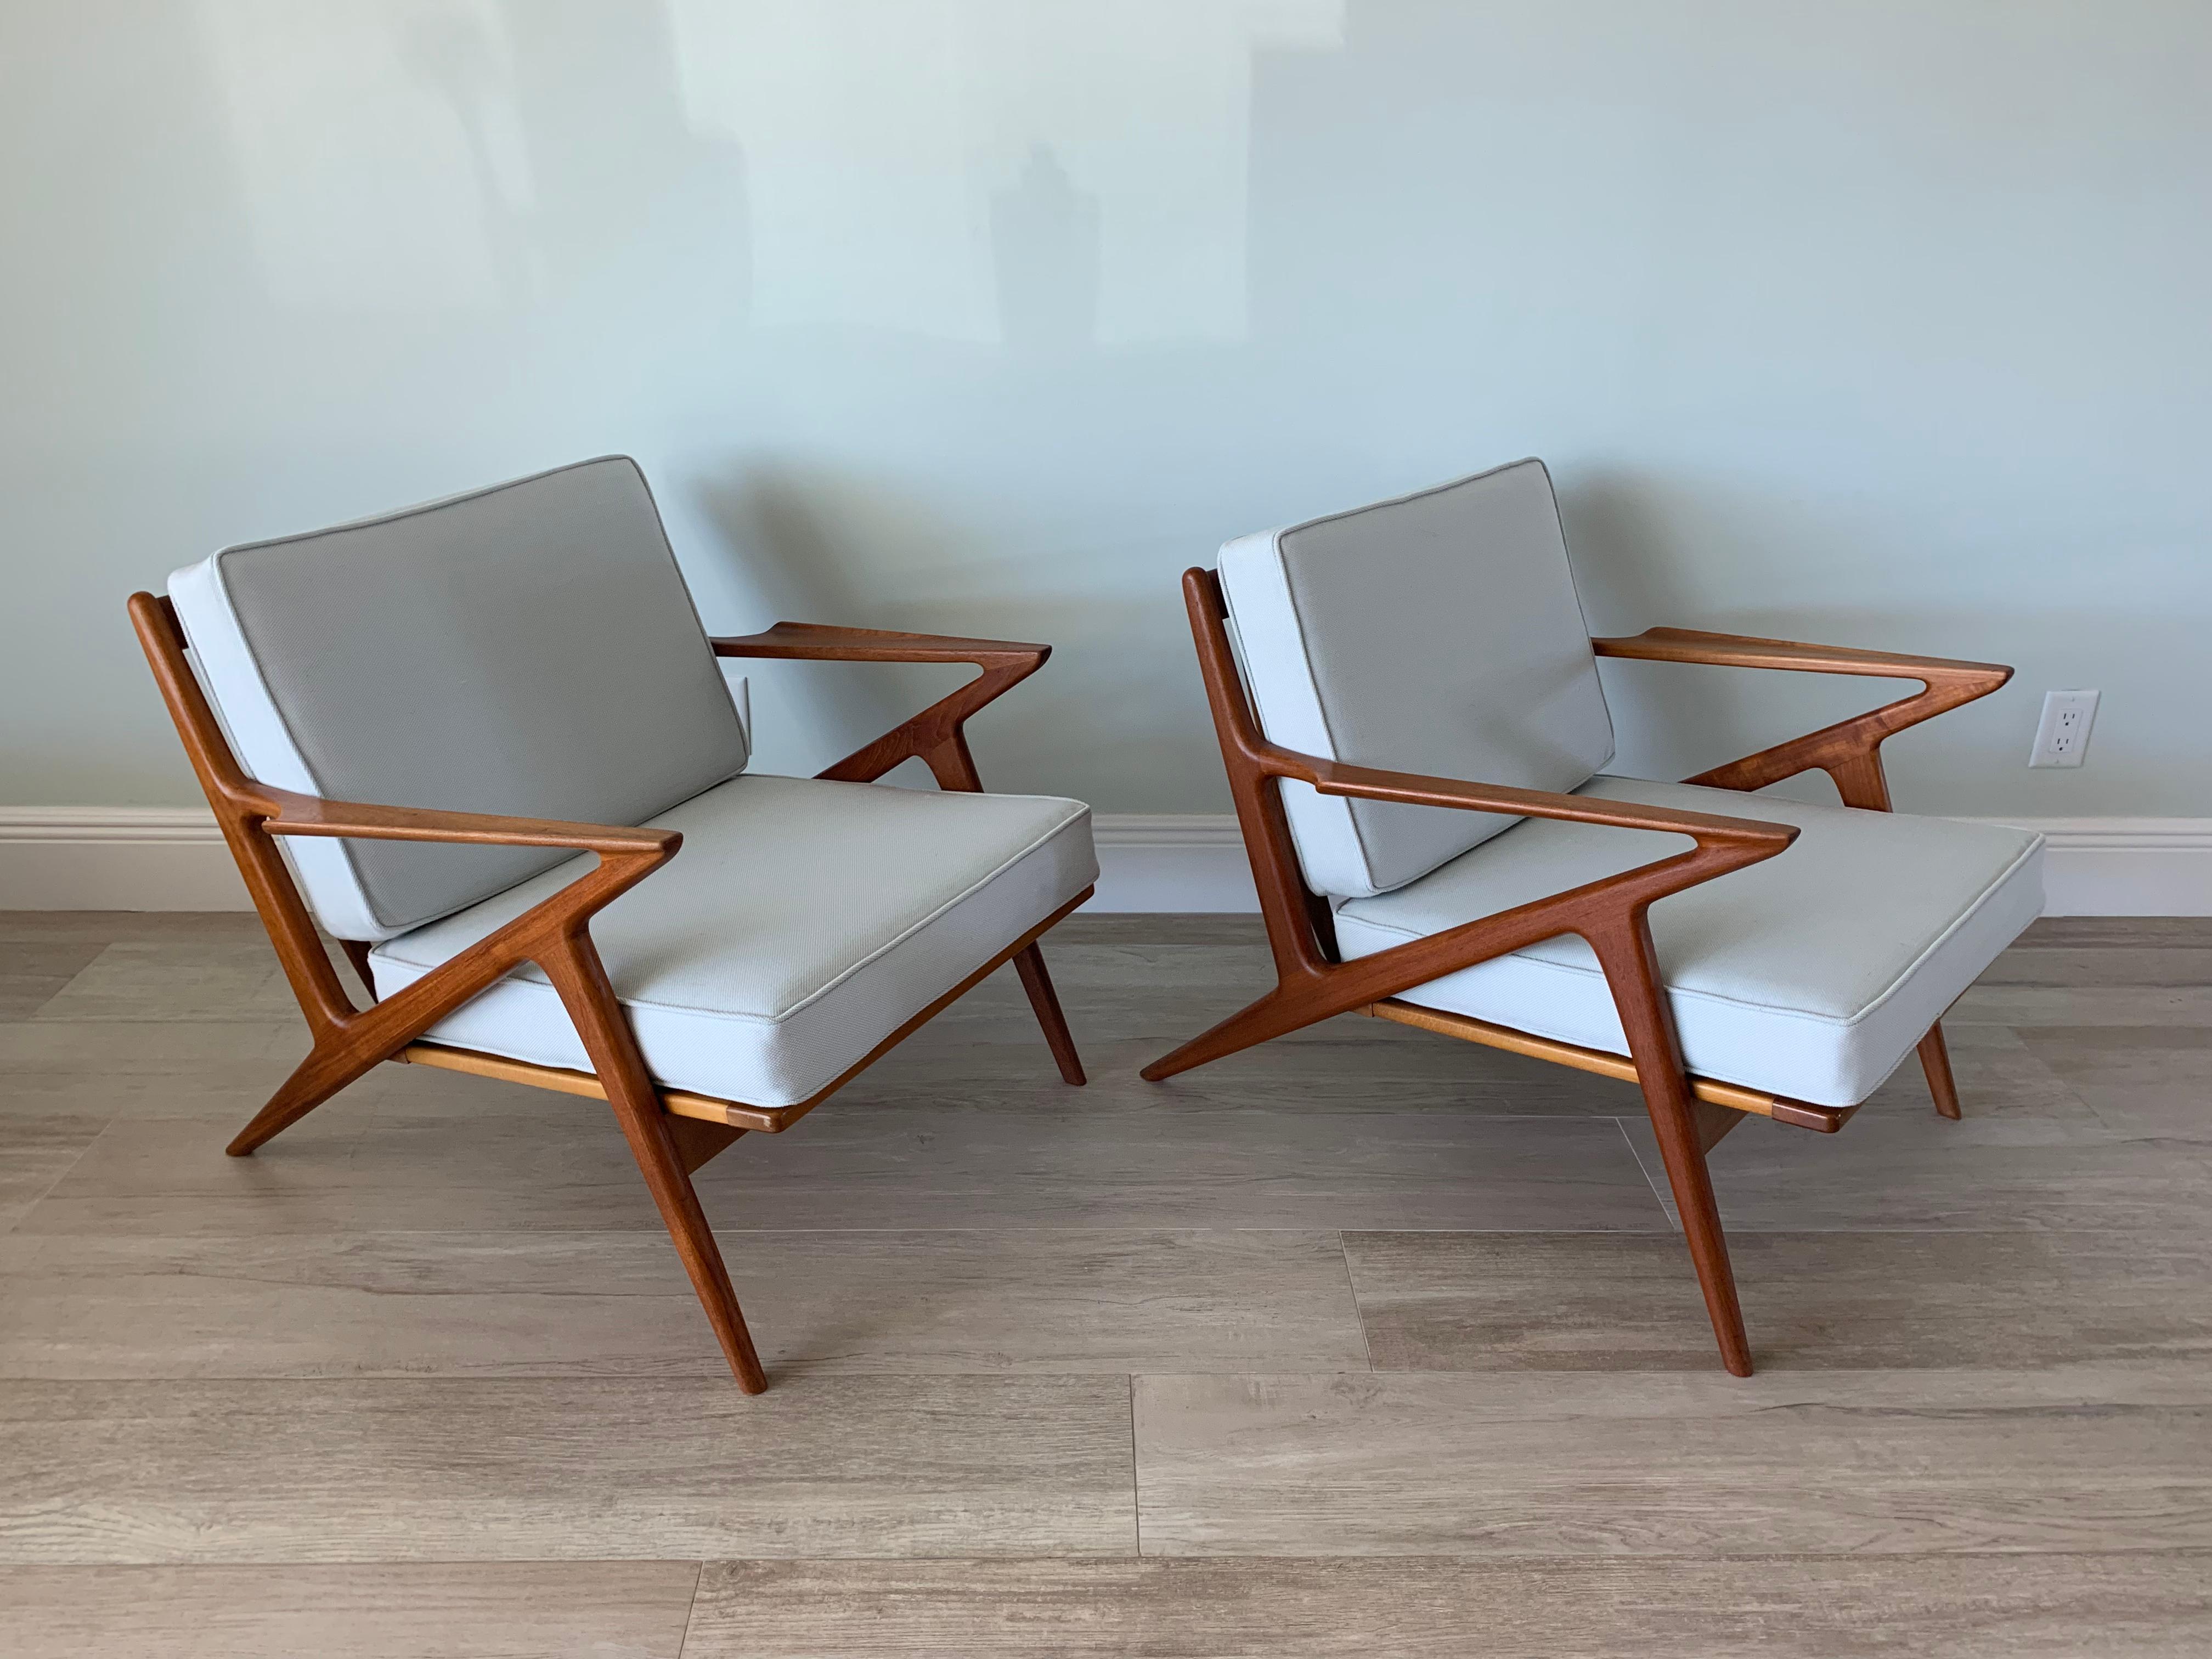 Pair of Z lounge chairs by Poul Jensen for Selig of Denmark.
Solid teak wood.
Both chairs show the Selig label.
Reupholstered with Maharam fabric.
The wood structure is in full original condition.